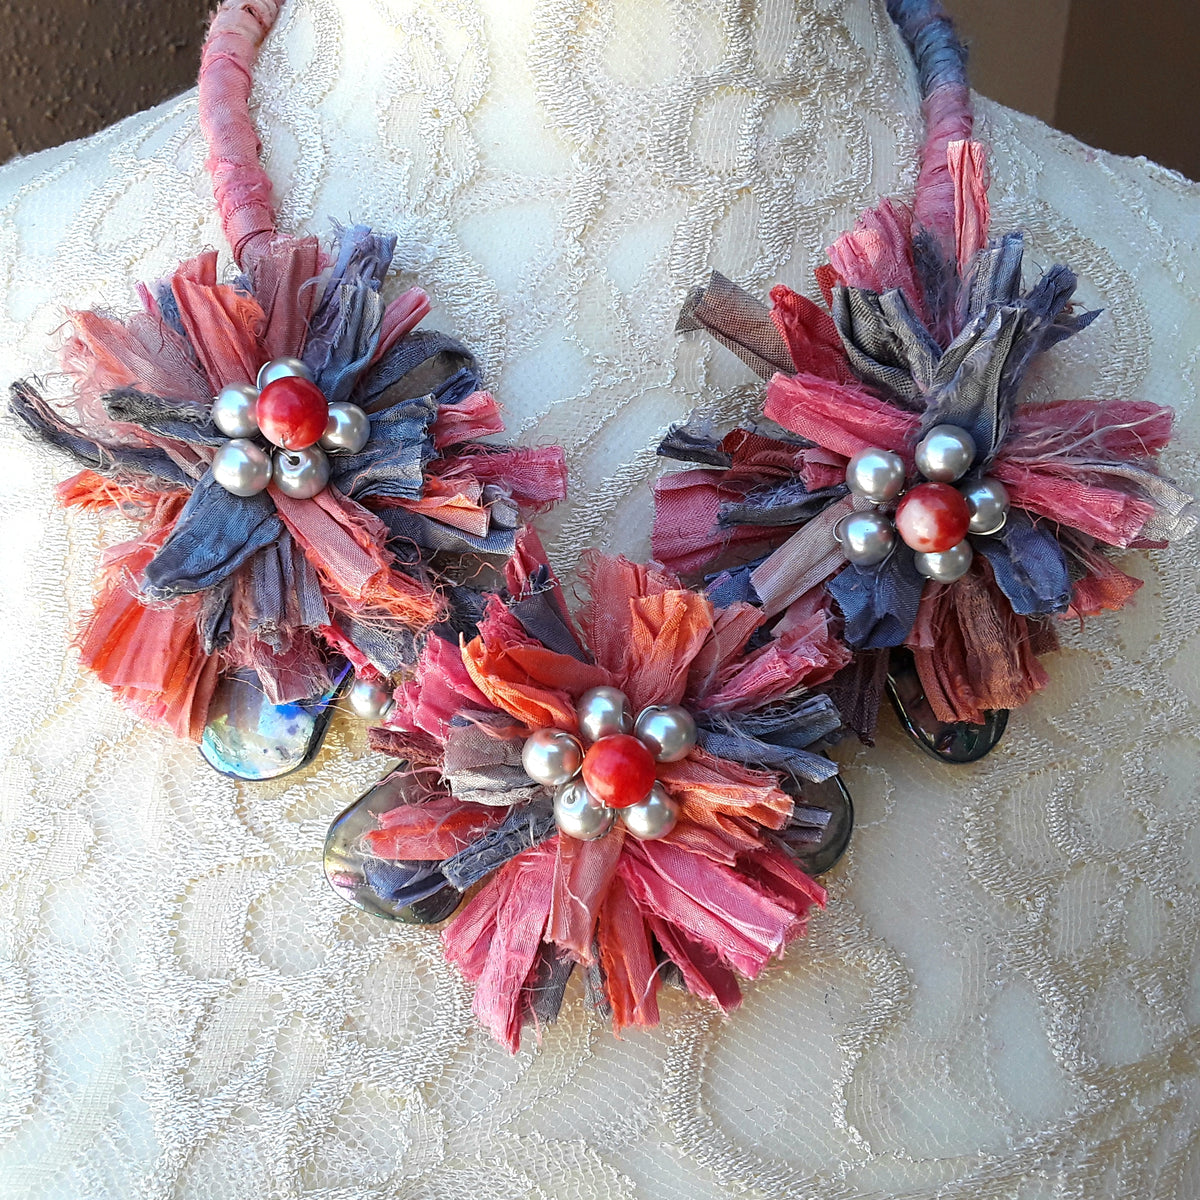 Shell and Sari Ribbon Flower Multi-Strand Statement Necklace - Colorful Upcycled Gift